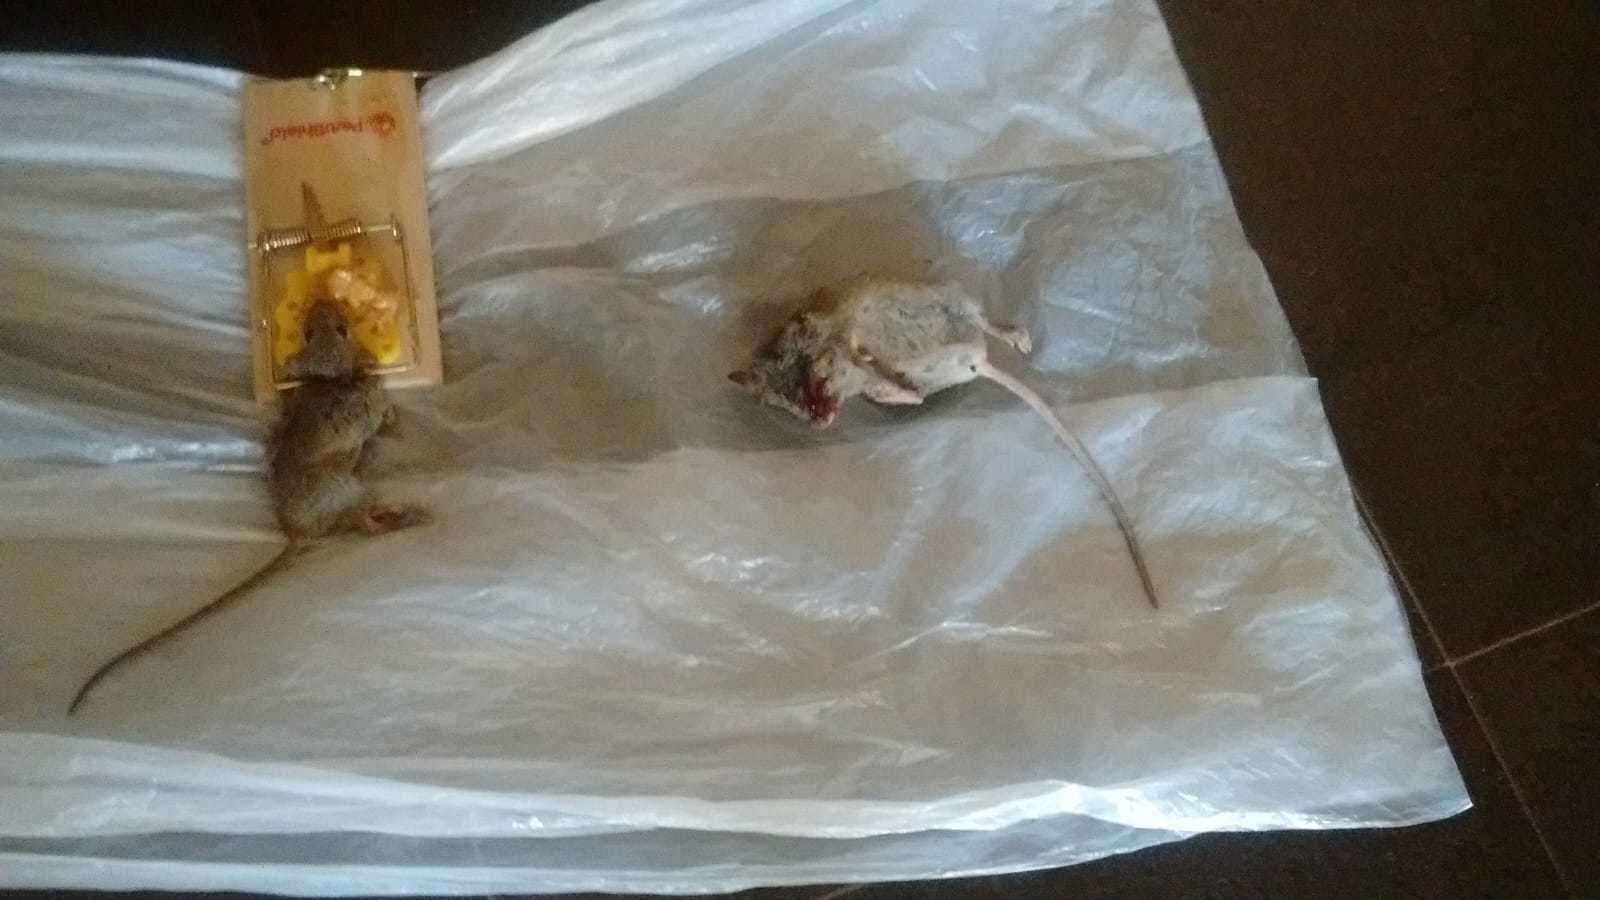 A dead mouse and a mouse in a trap at Laura's home